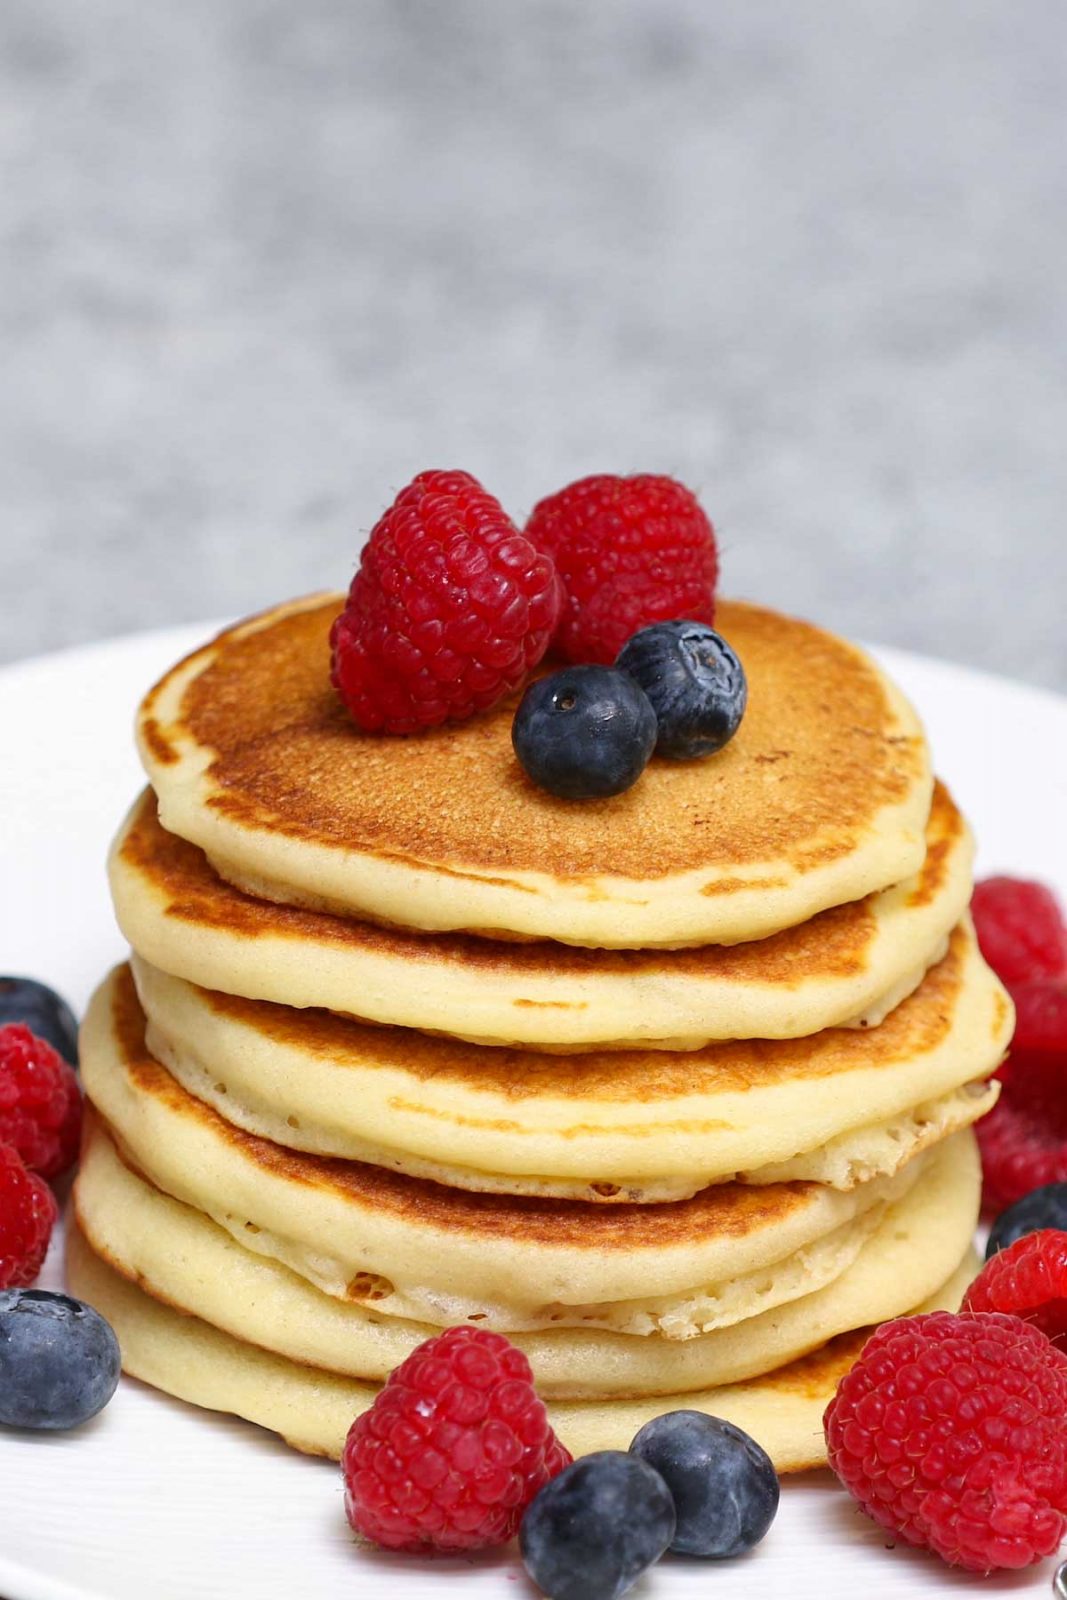 Every wonder whether you can save pancake batter for later? If you find yourself with a bunch of extra pancake batter, don’t worry! There are ways to extend the life of that batter so you can enjoy pancakes later on, or even repurpose the batter in something else! Keep reading to find out more.